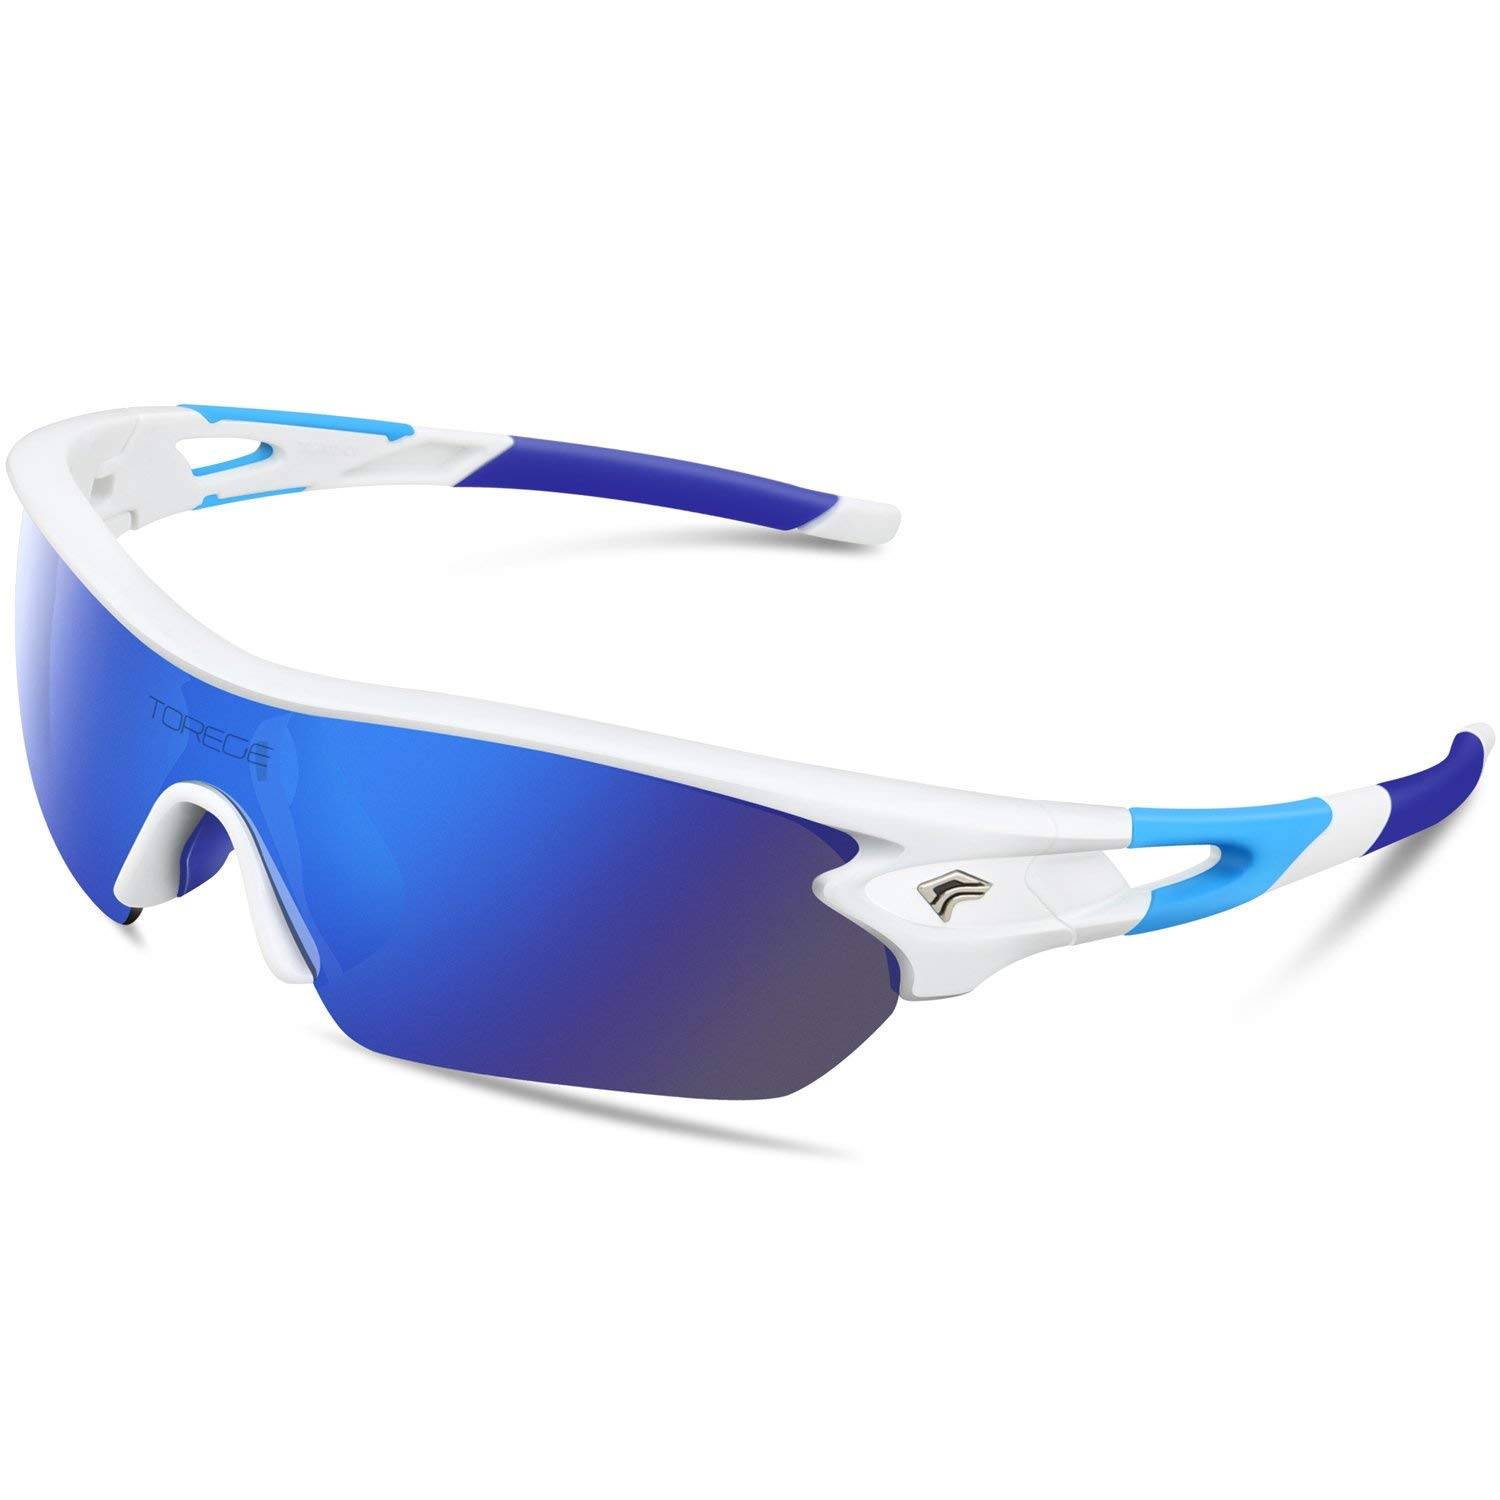 TOREGE Polarized Sports Sunglasses with 5 Interchangeable Lenses